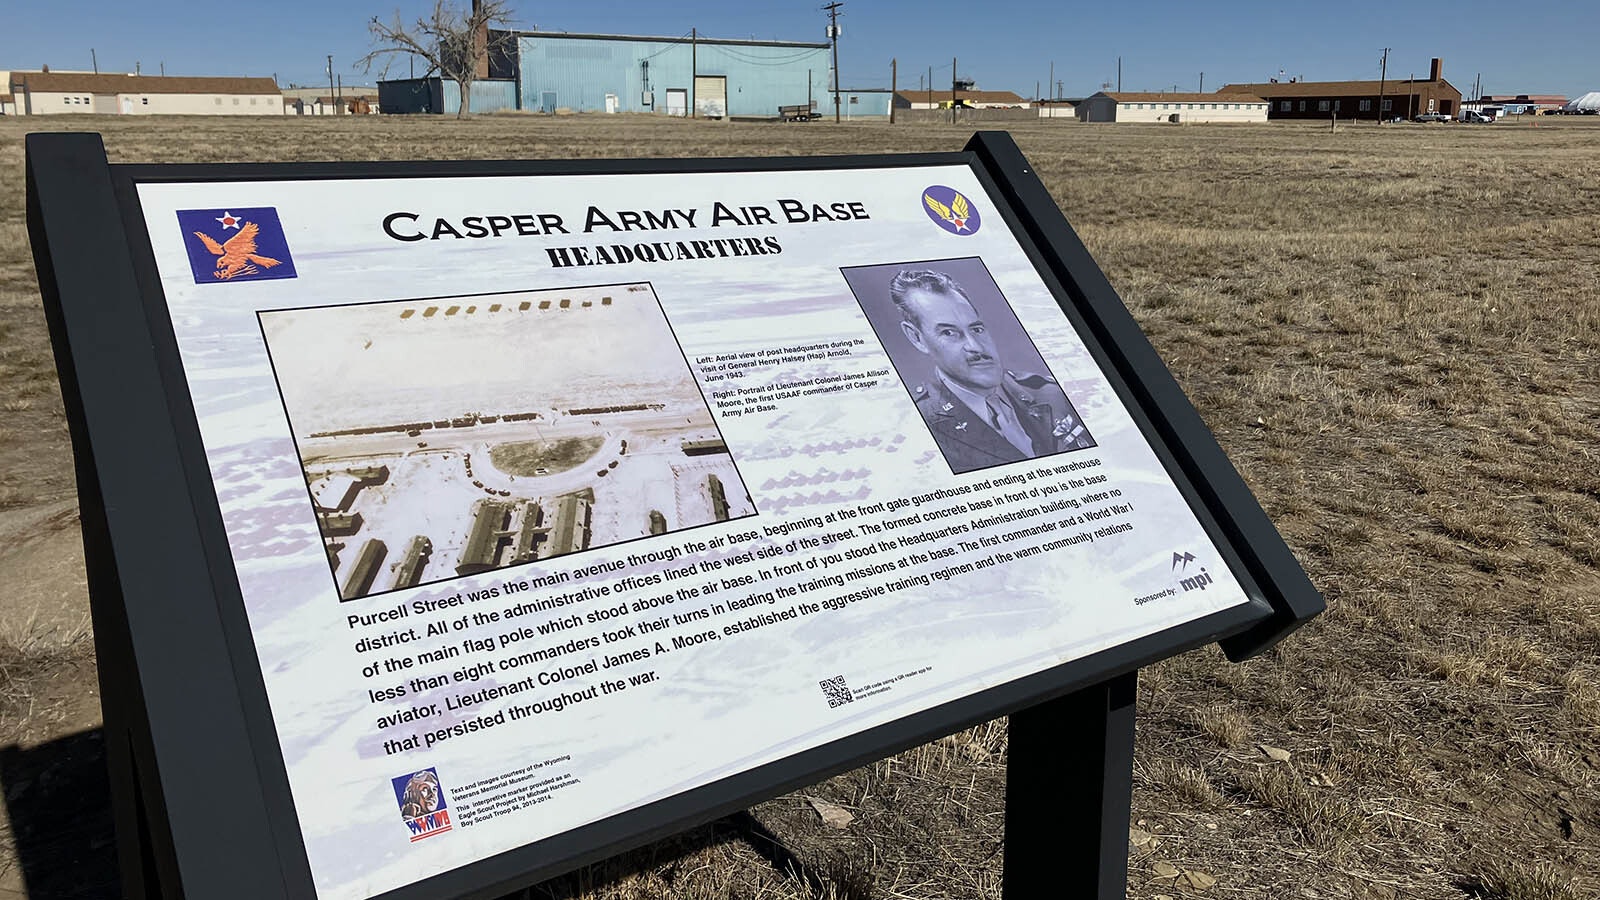 The former headquarters and focus point of Casper Army Air Base is now a vacant lot. However, dozens of buildings from the airbase still sit on airport property.